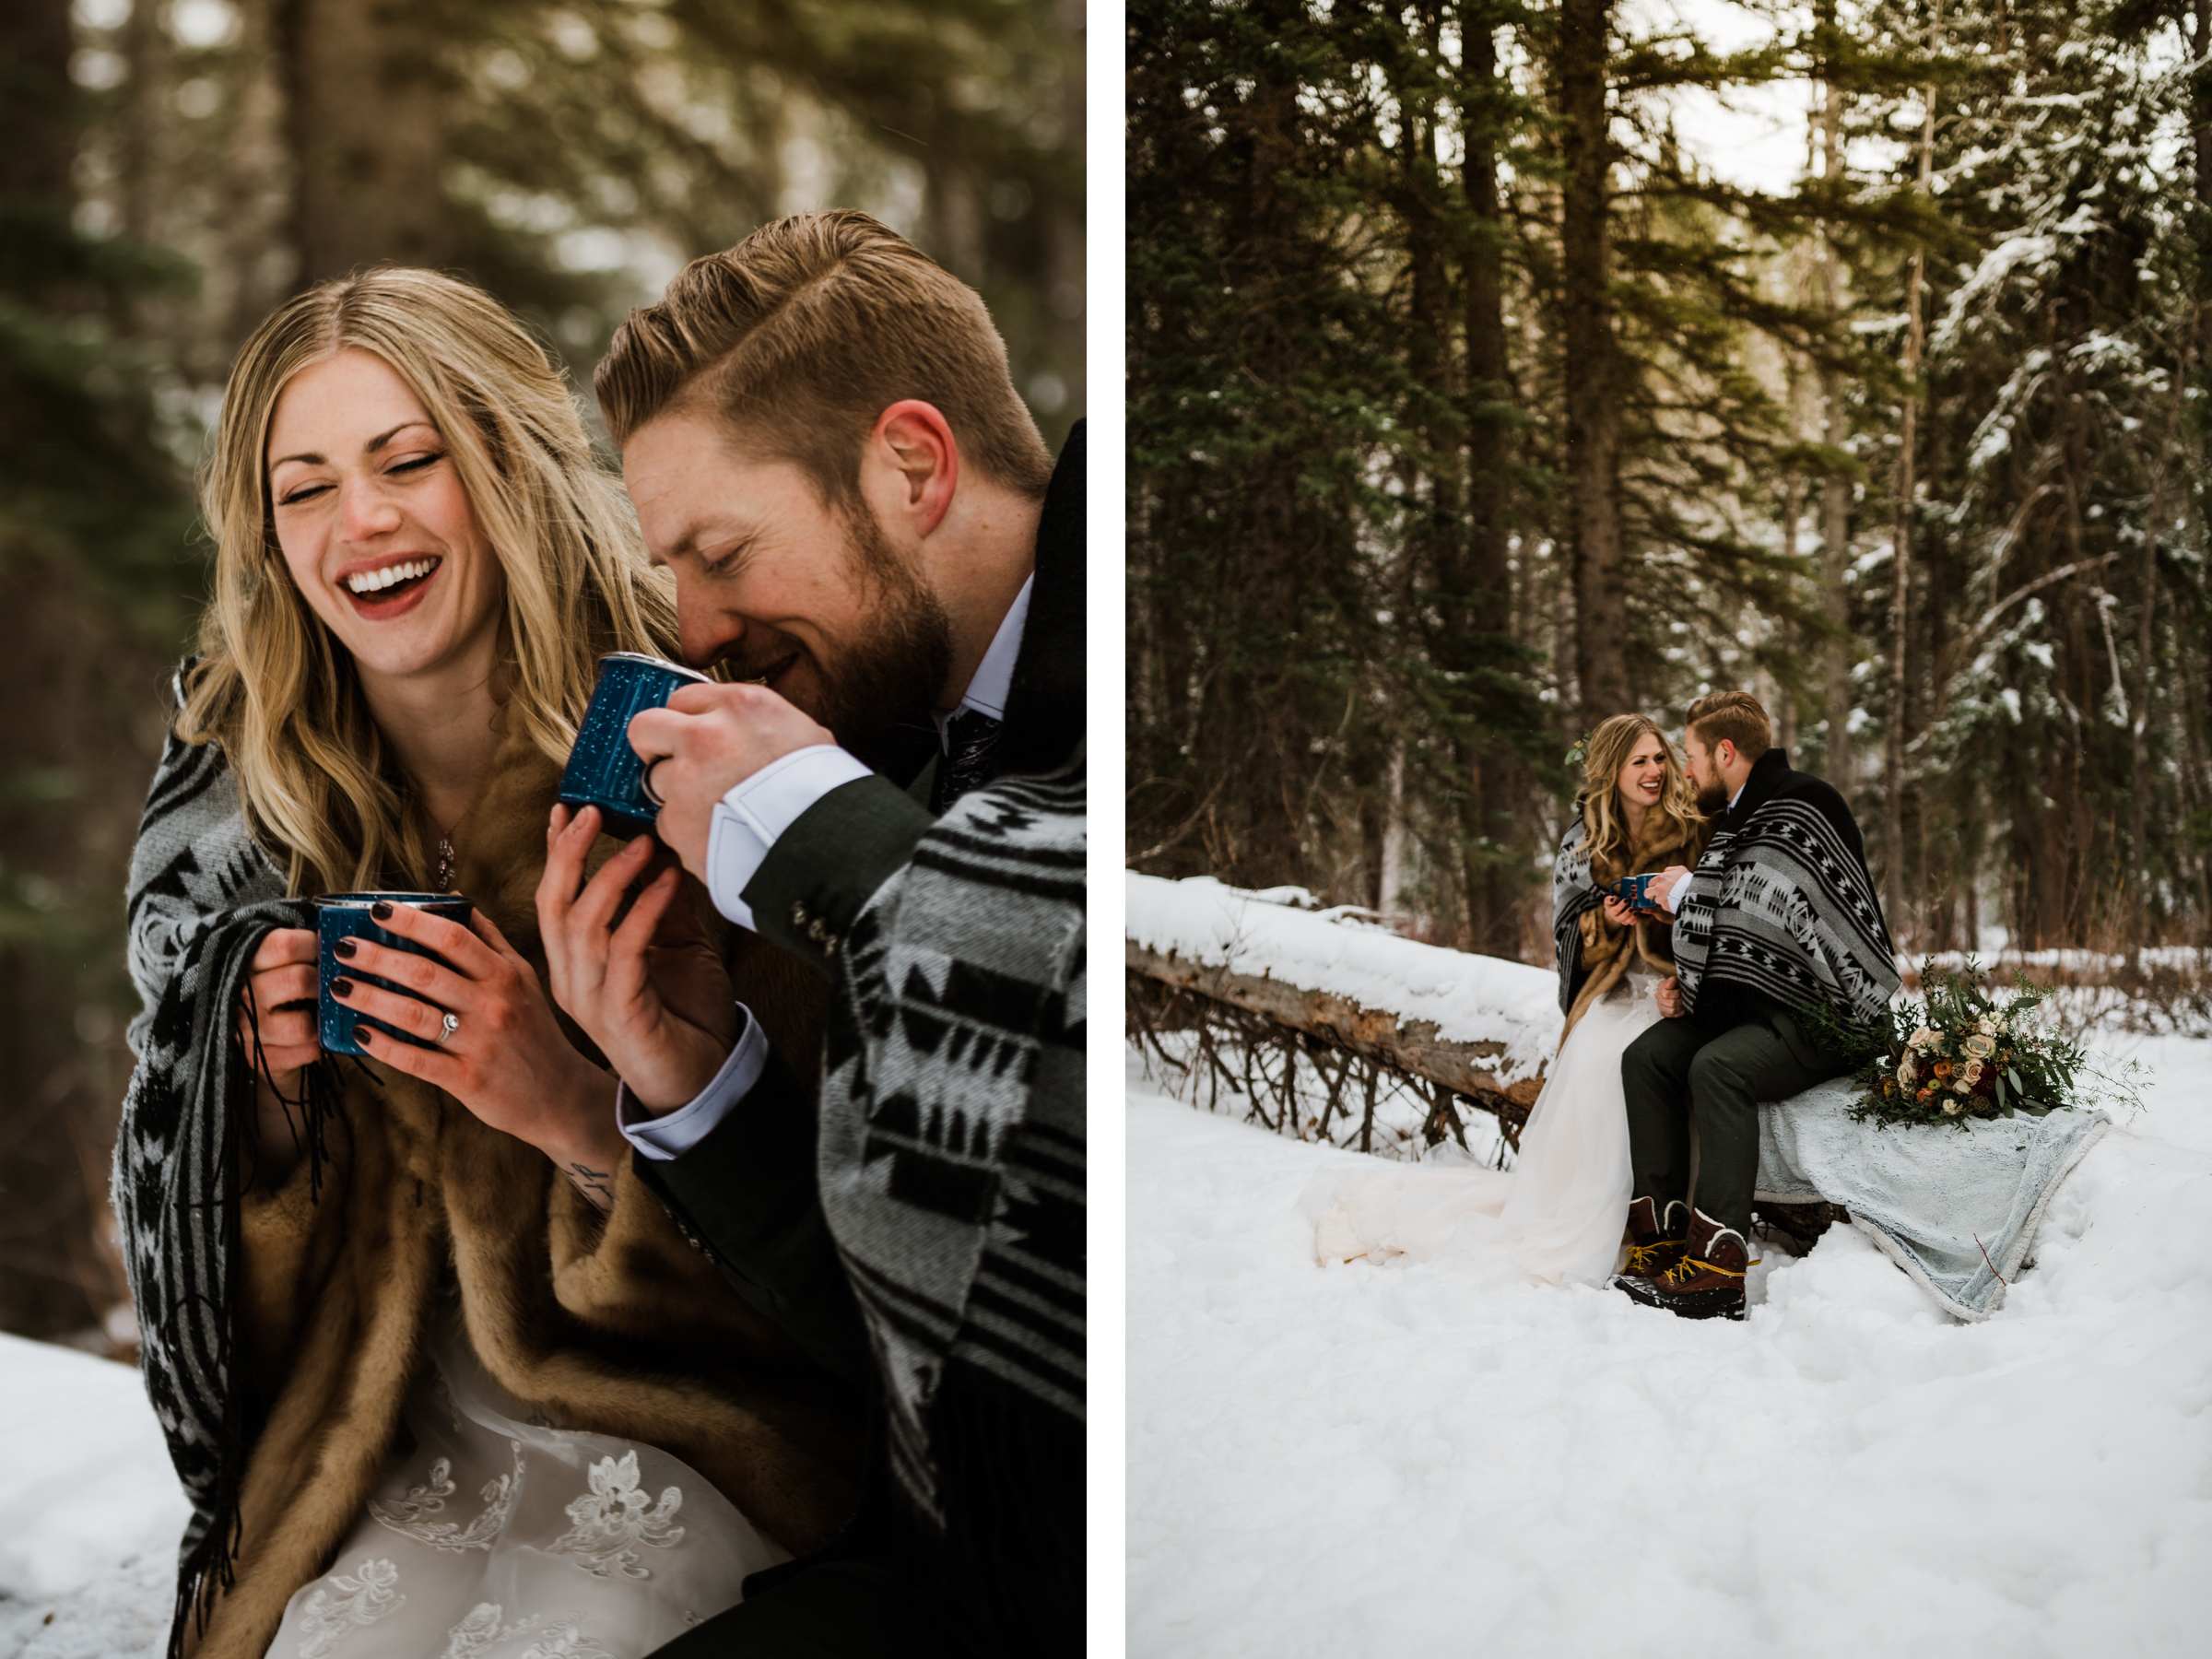 Canmore Elopement Photographer in the Canadian Rockies - Image 51